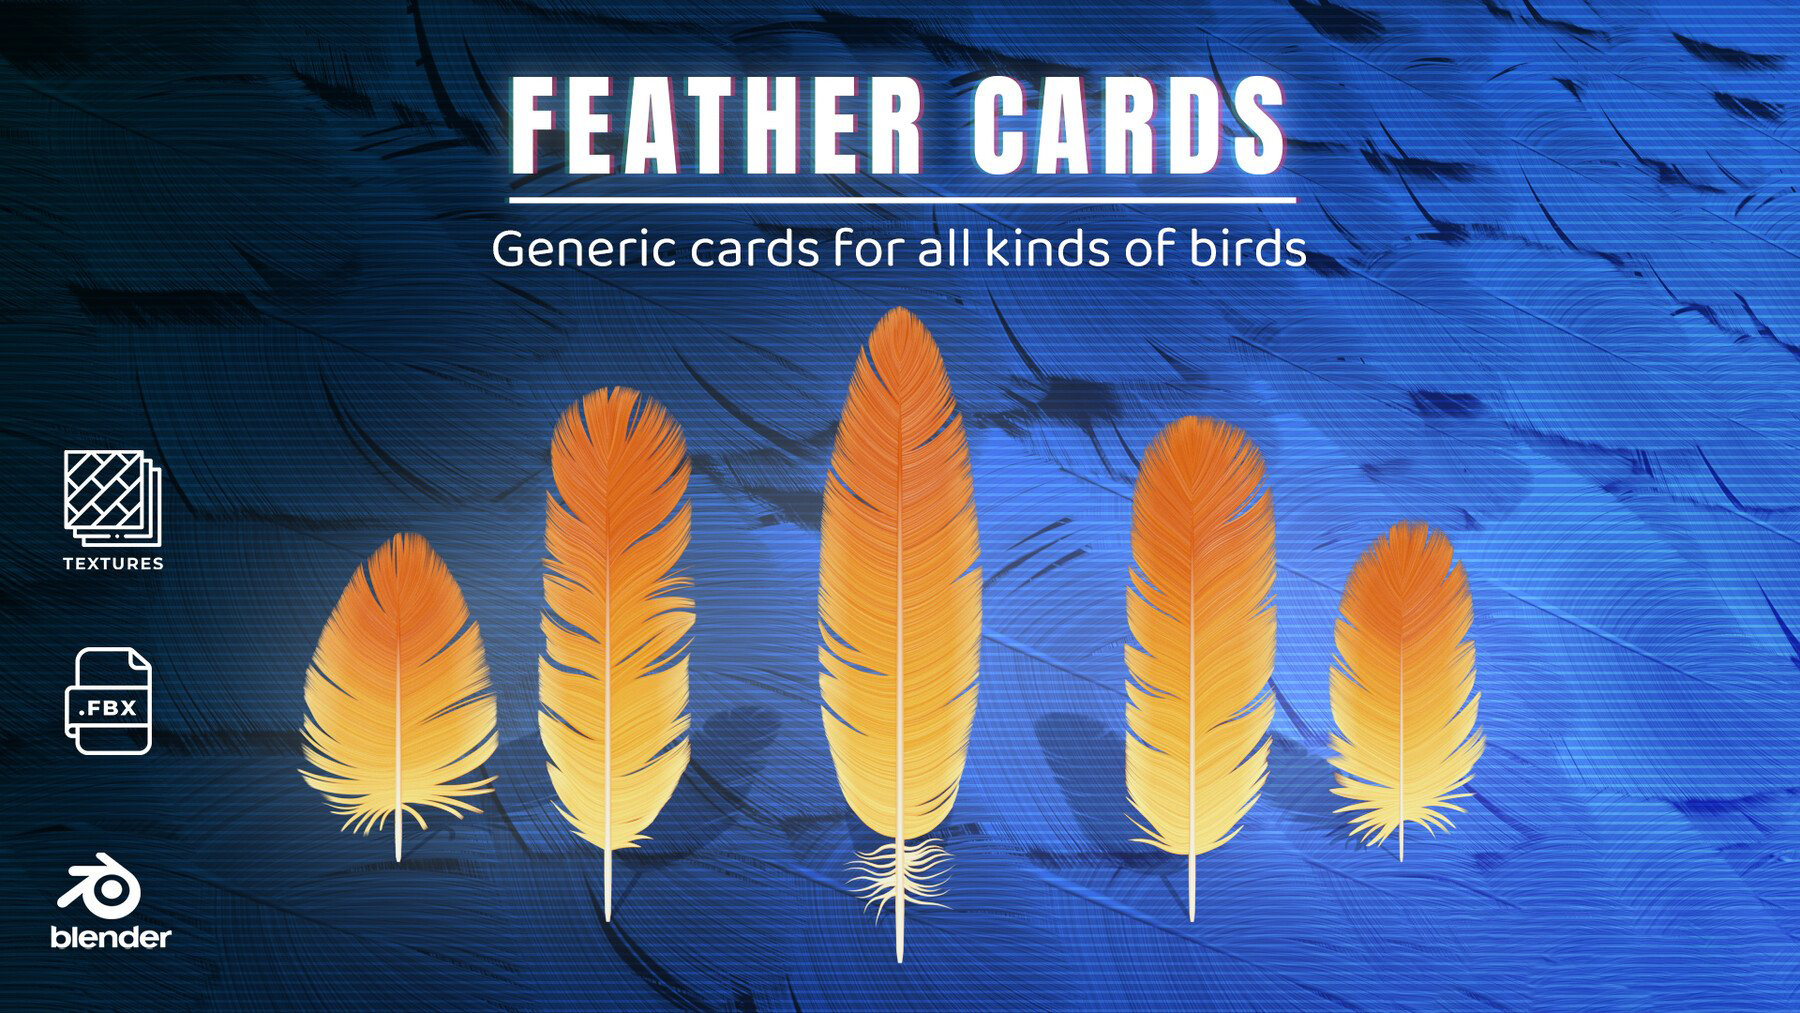 Feather Cards Texture Pack for your Feathered Creatures